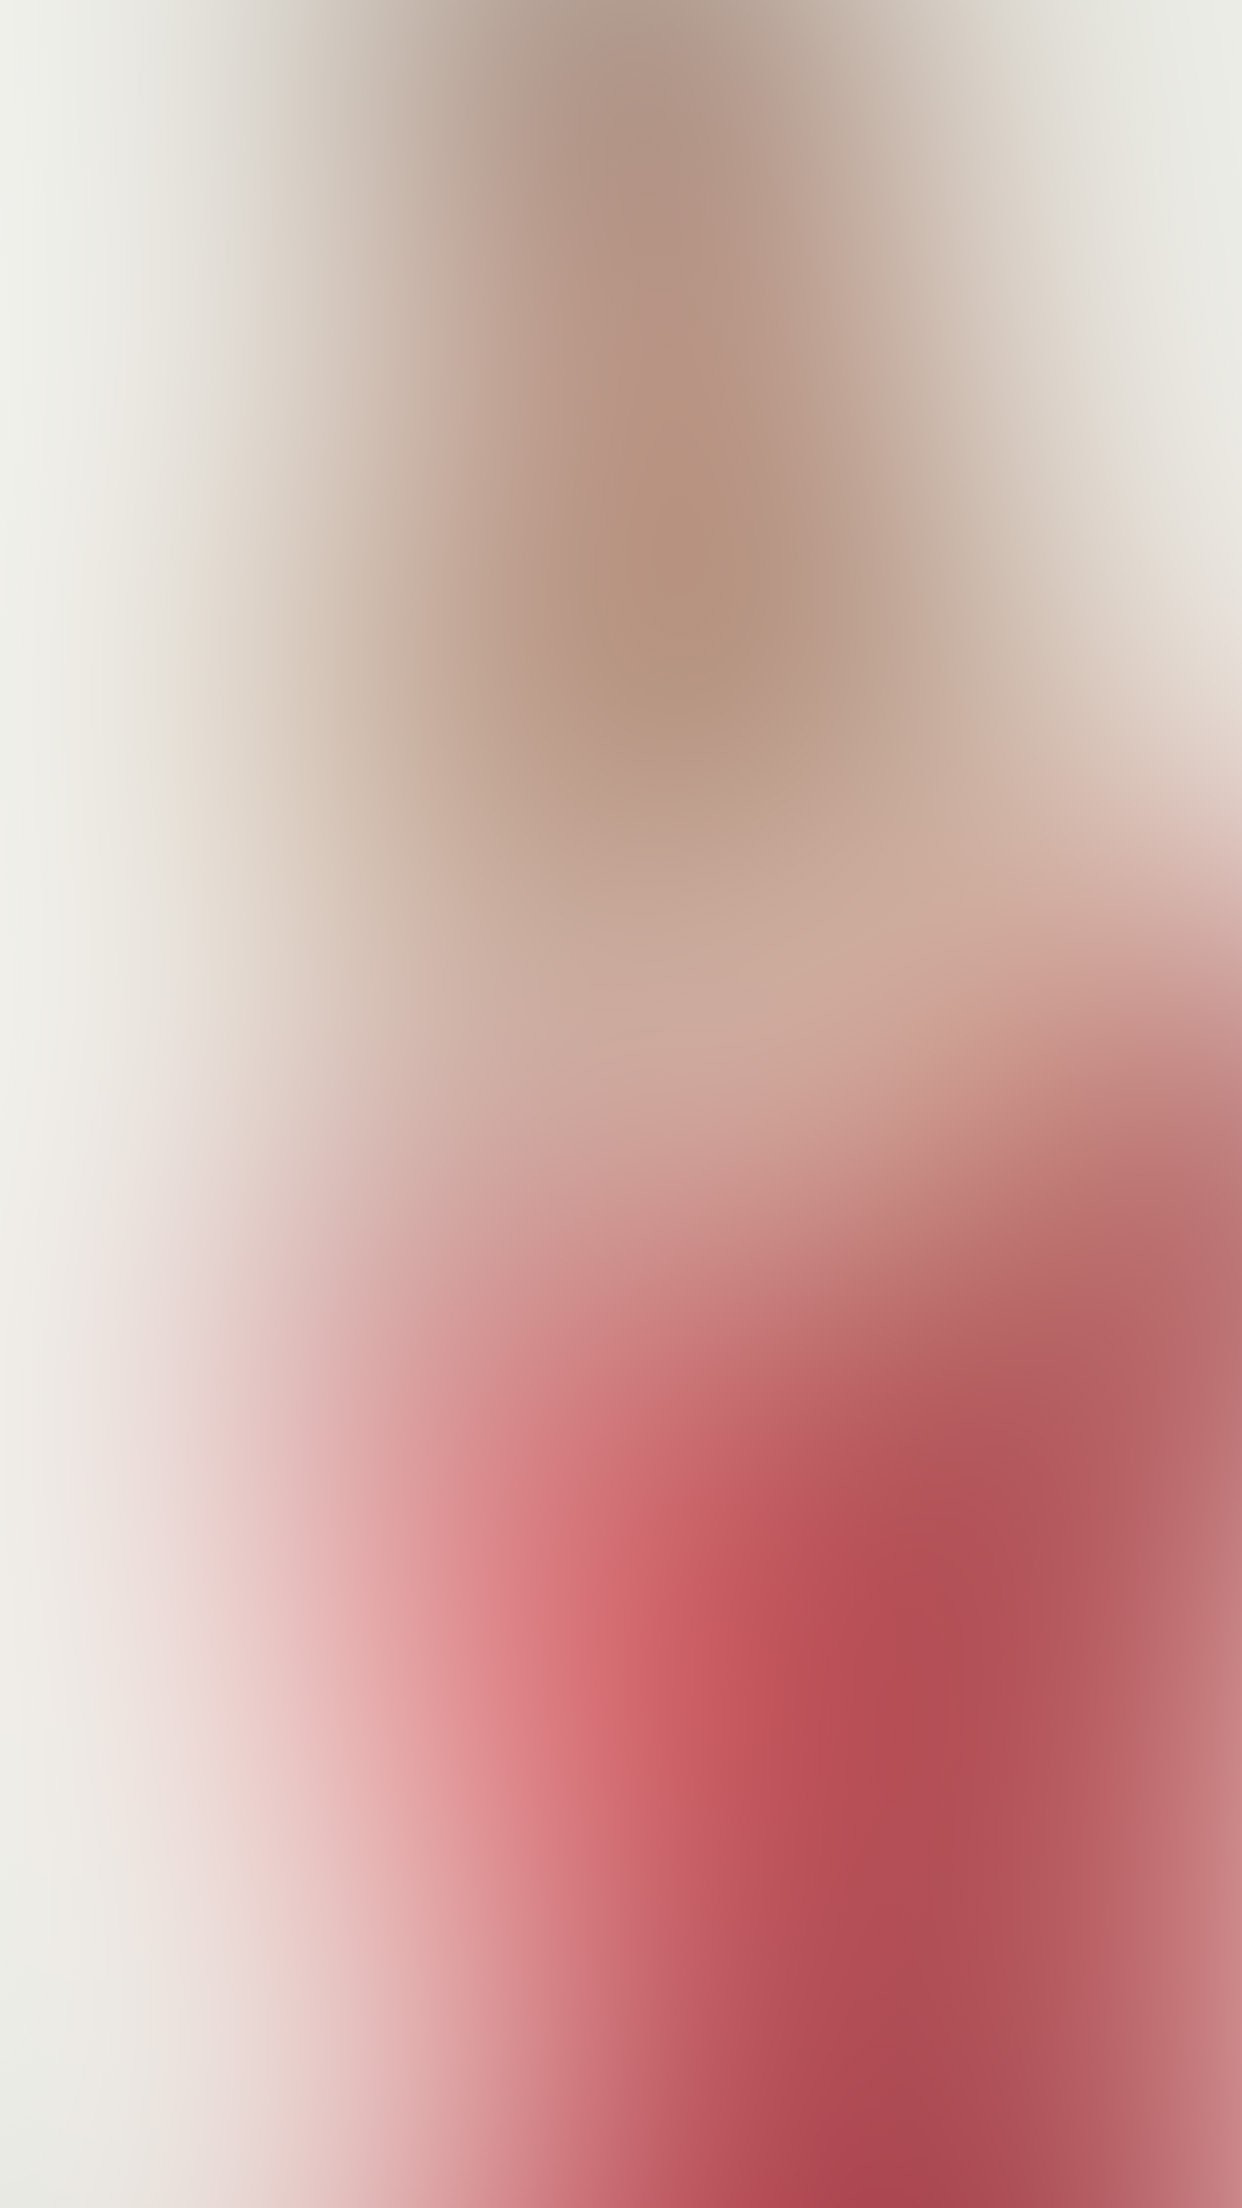 1242x2208 awesome soft-her-standing-gradation-blur-red-iphone6-plus